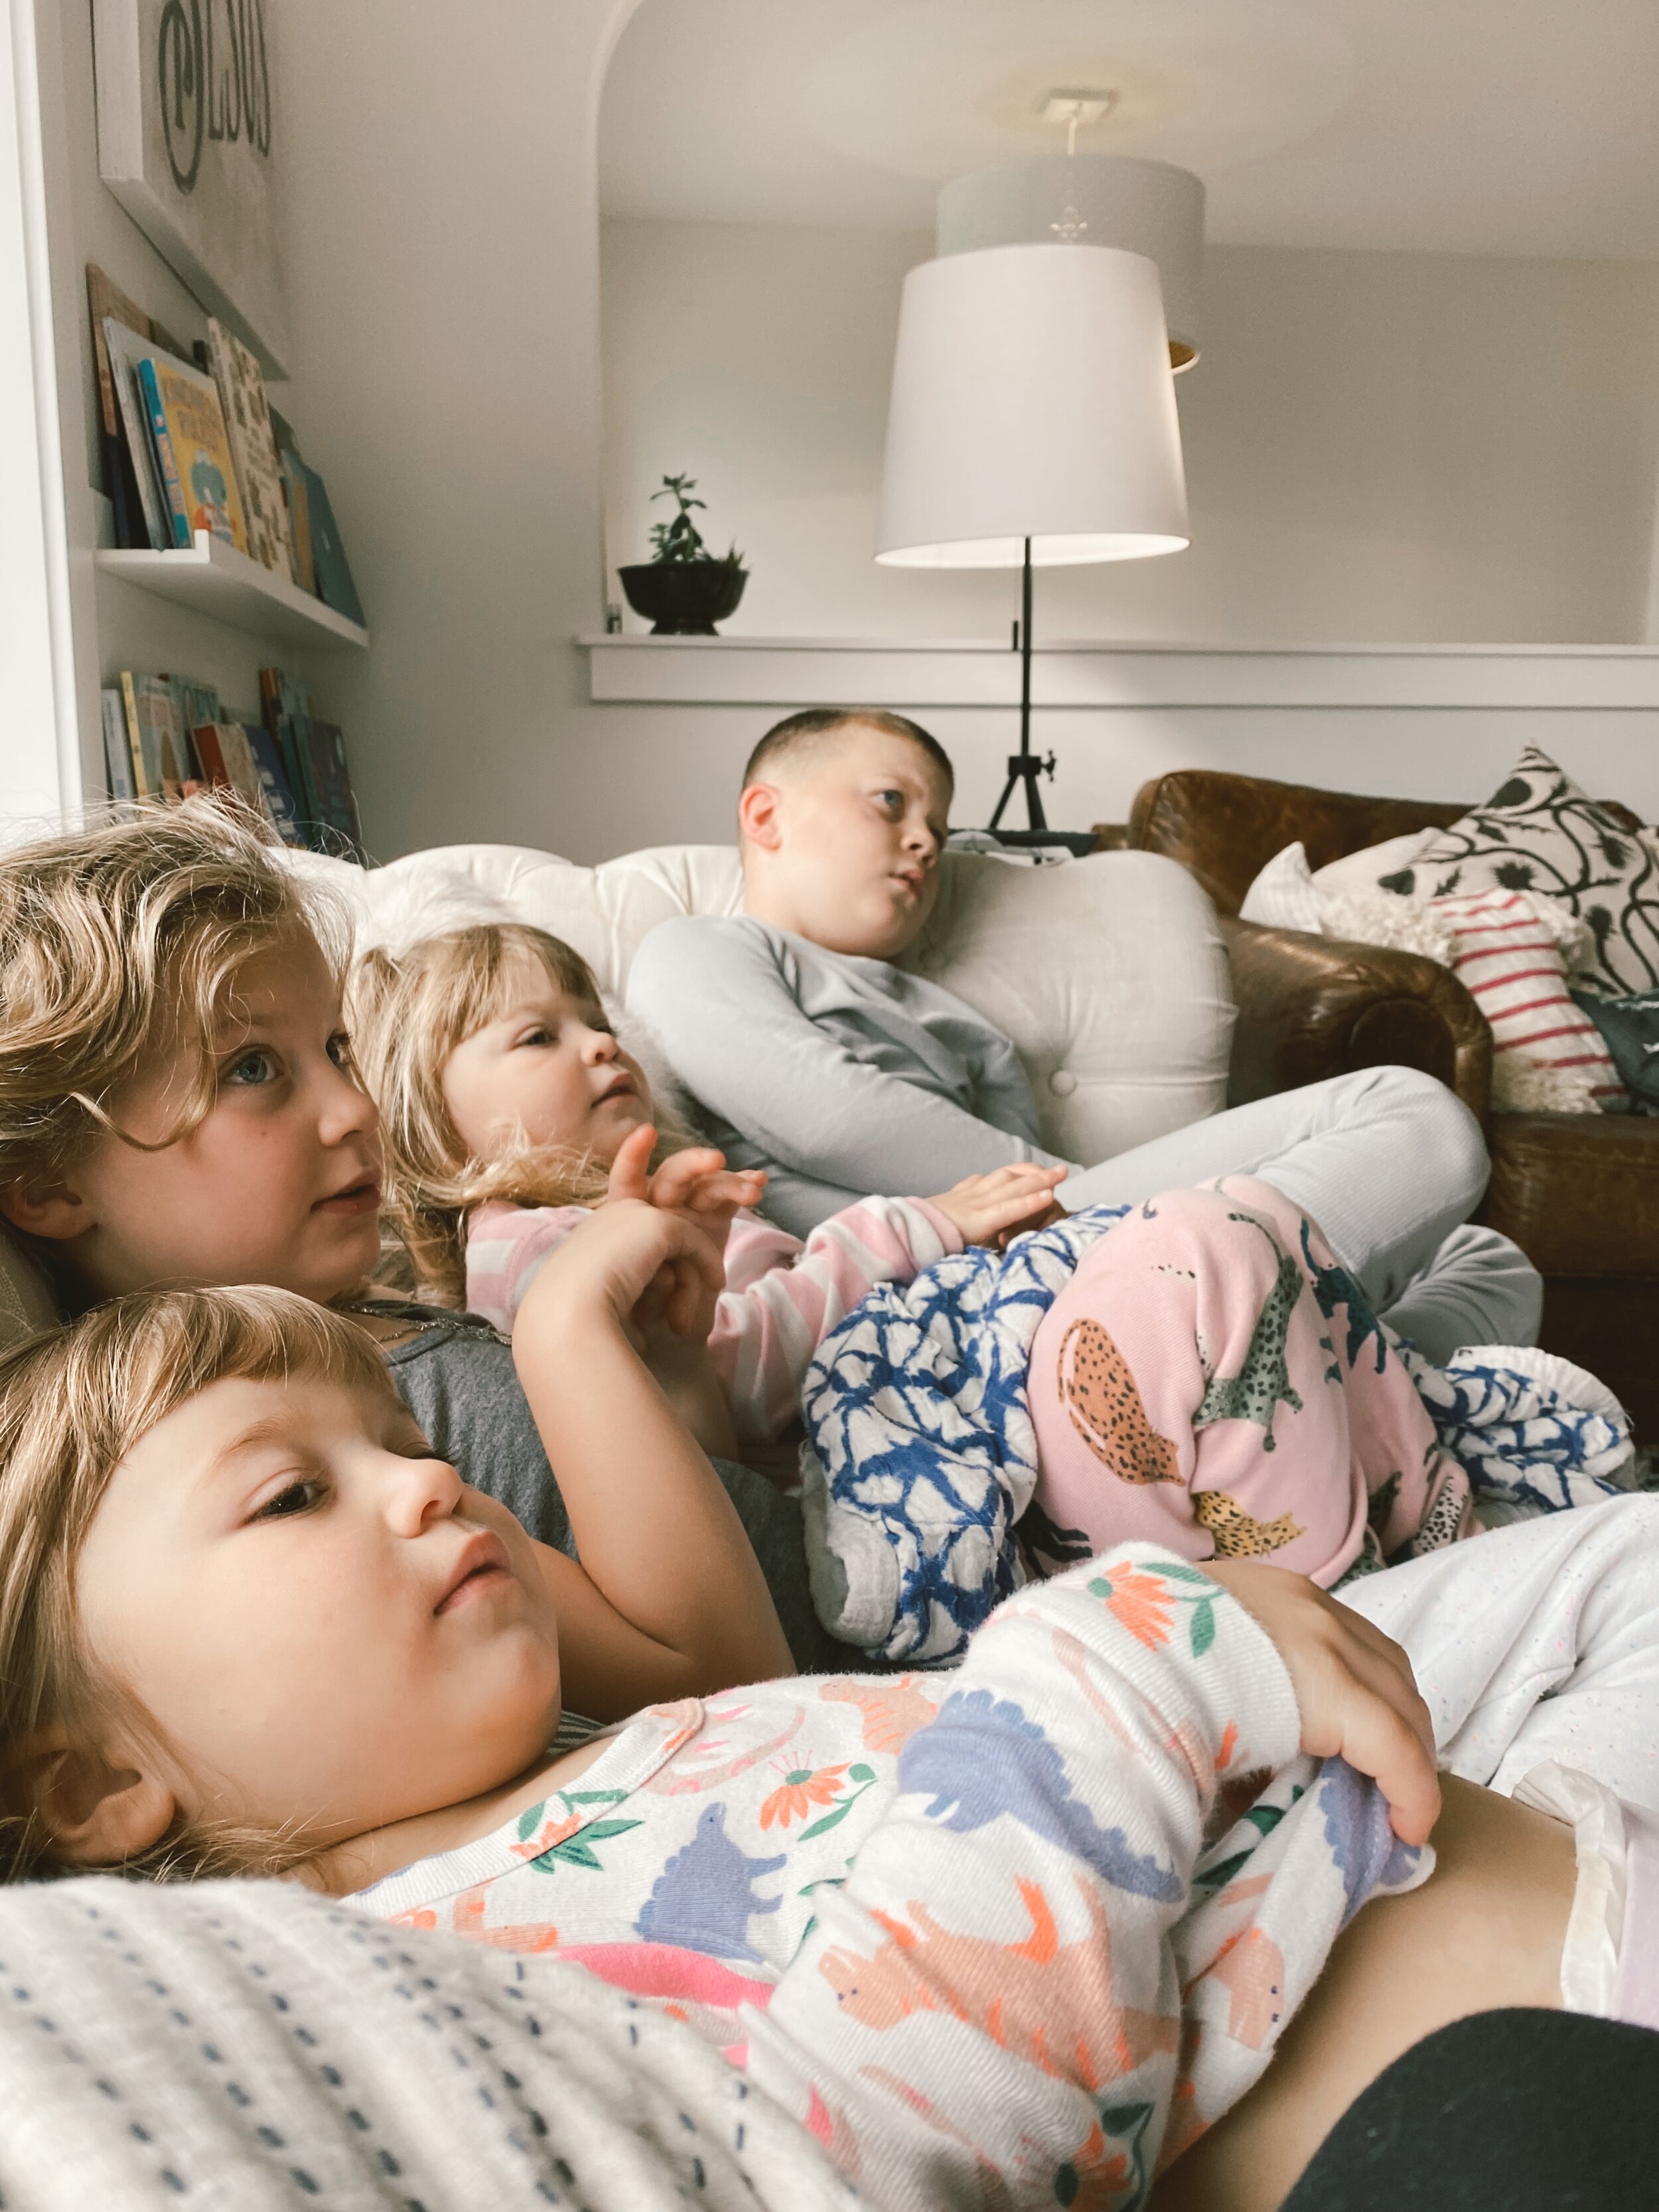  my morning view most days… the 4 or 5 snuggled up on the couch watching a show before the chaos begins for the day! will never not be grateful for those moments.  